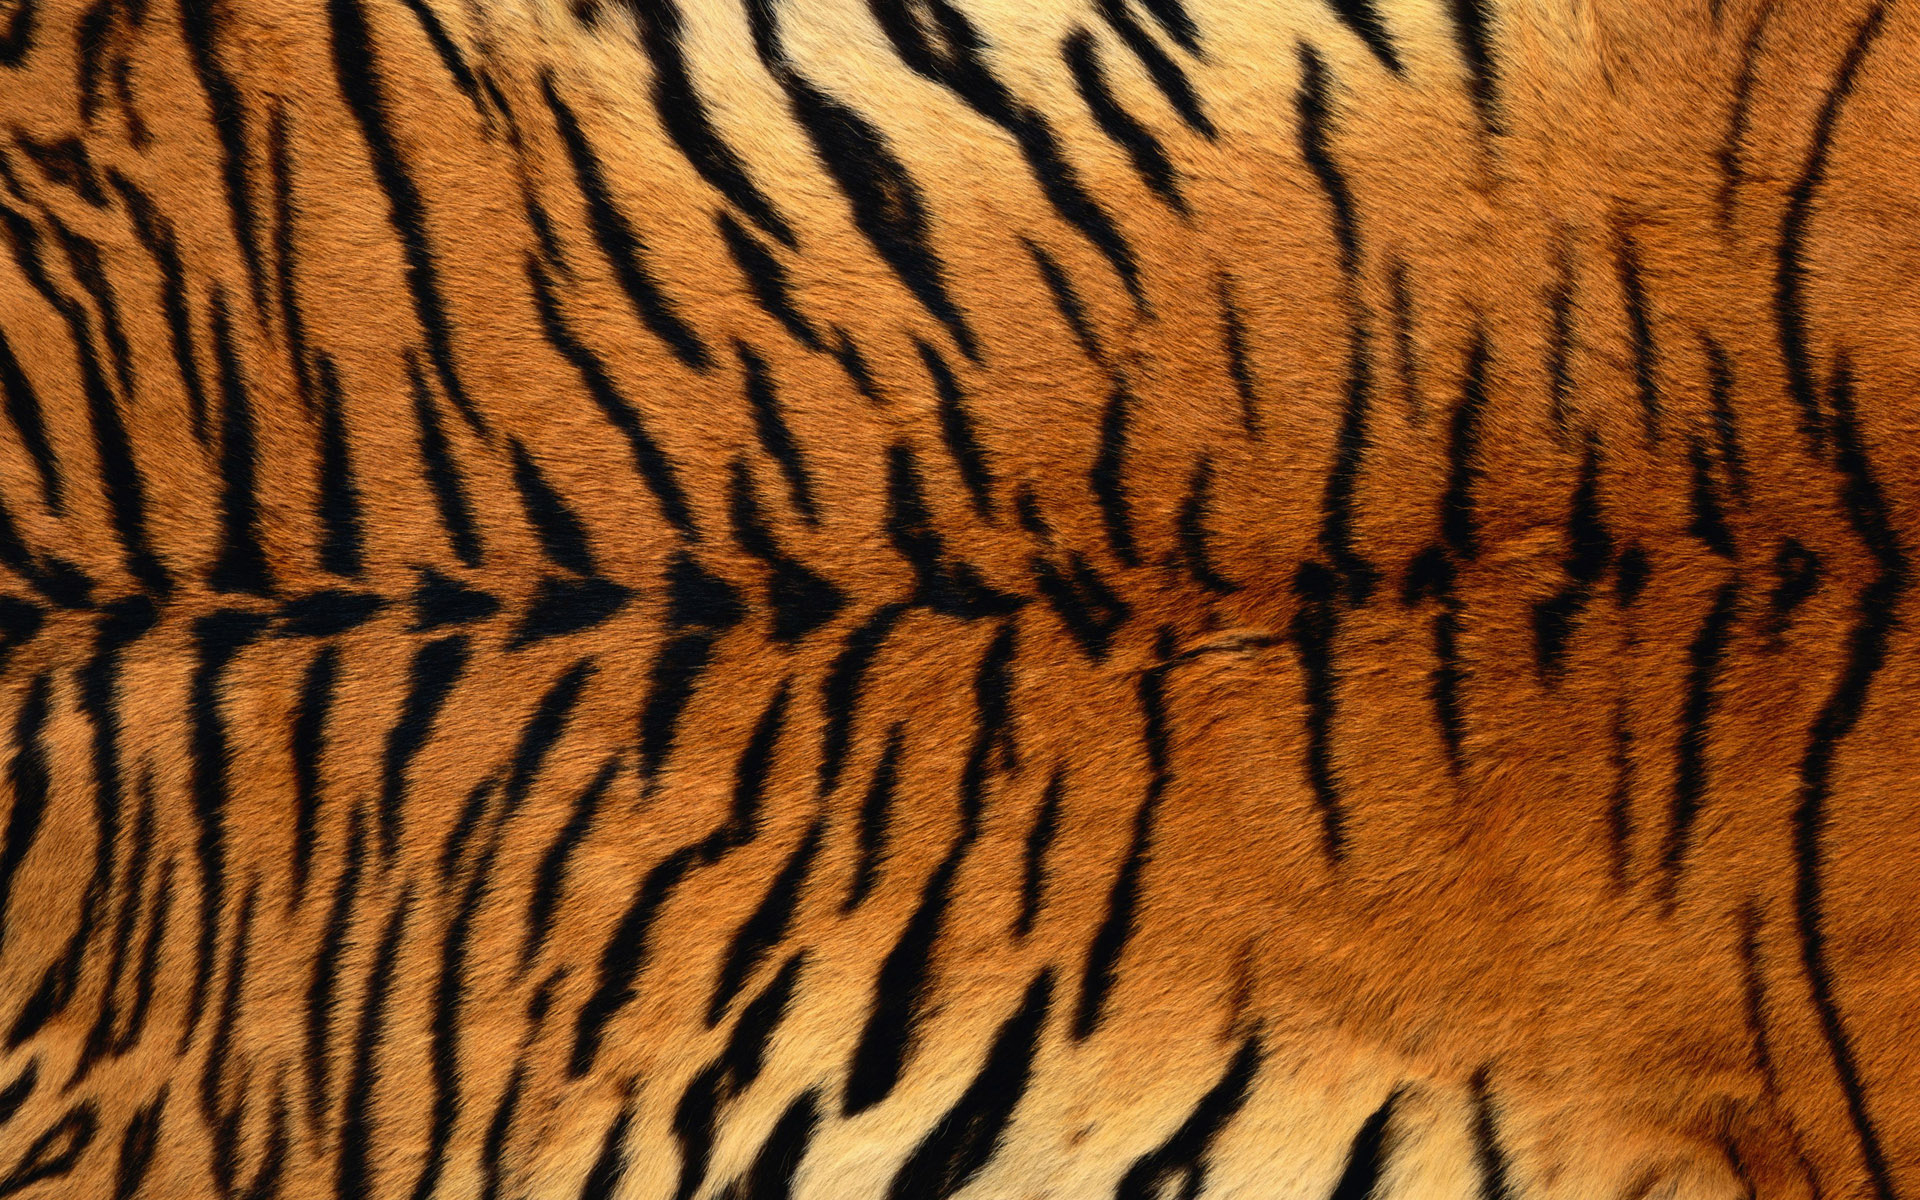 Tiger Leather Background Gallery Yopriceville High Quality